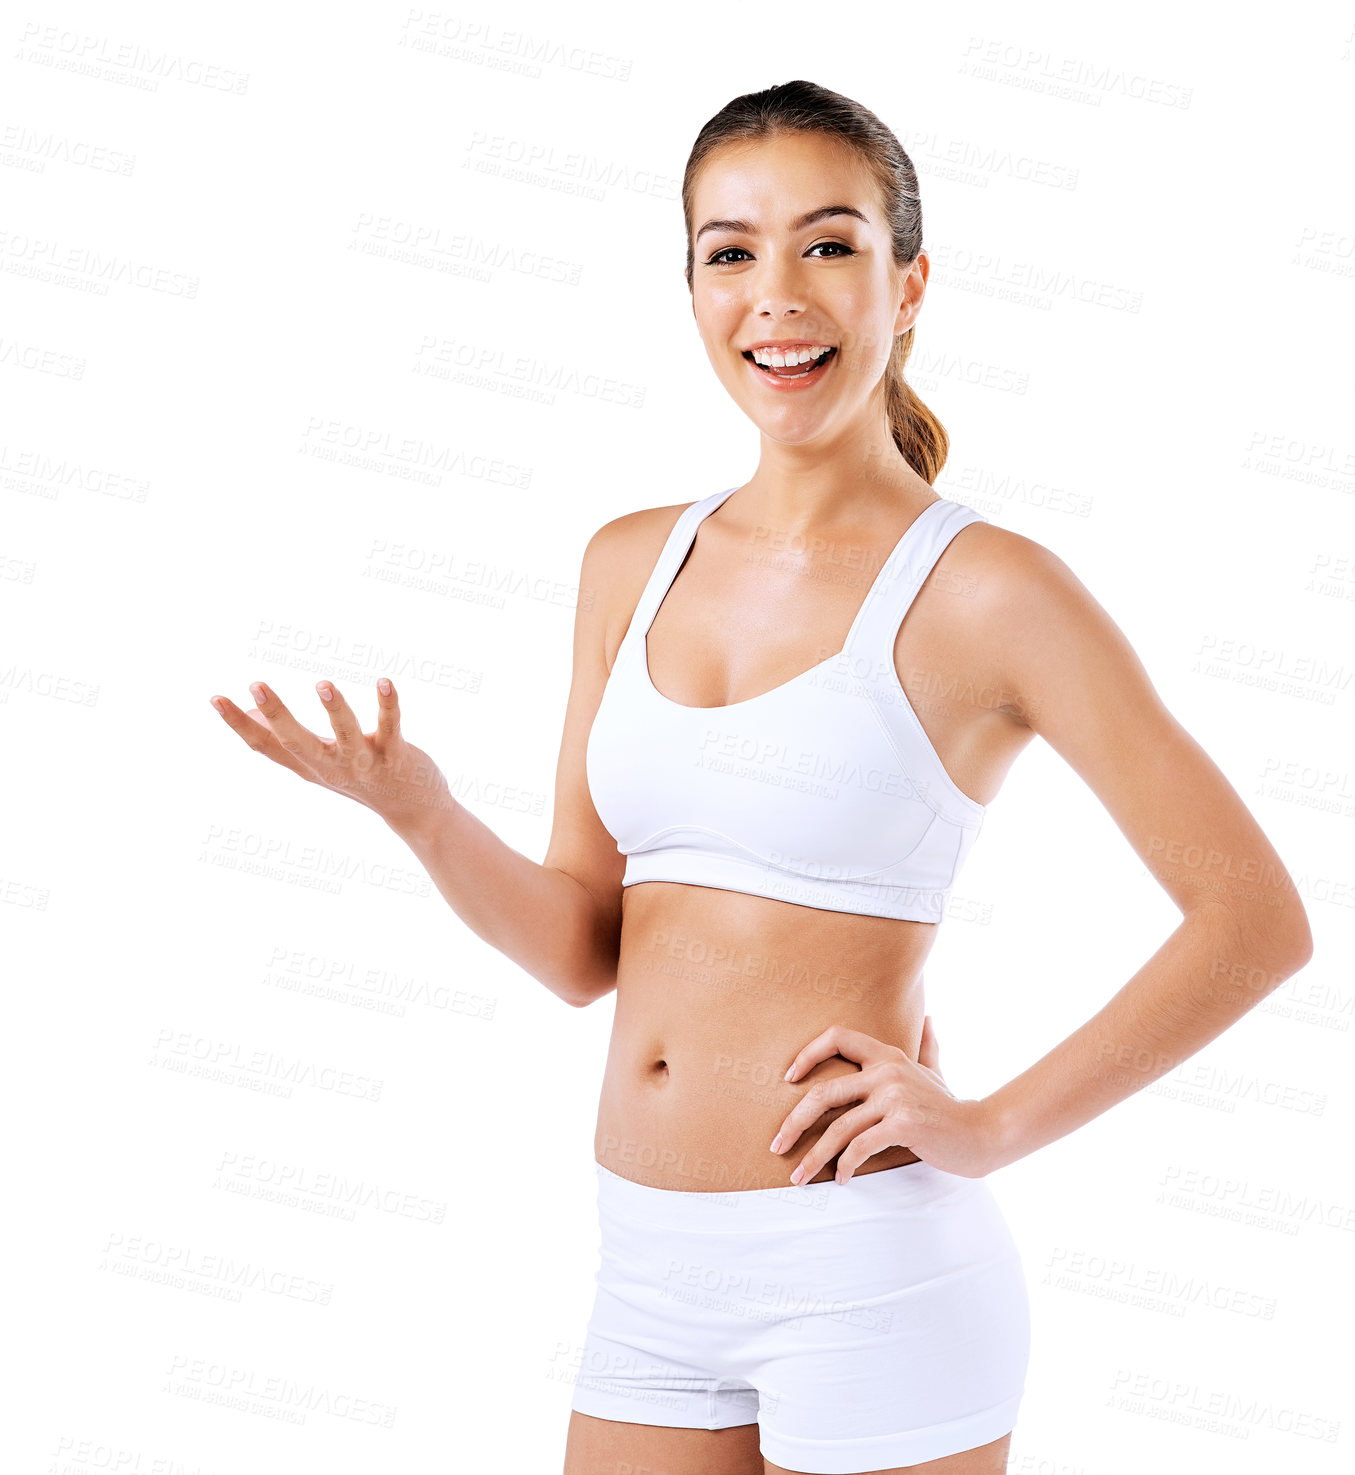 Buy stock photo Shot of a healthy woman posing against a white background 